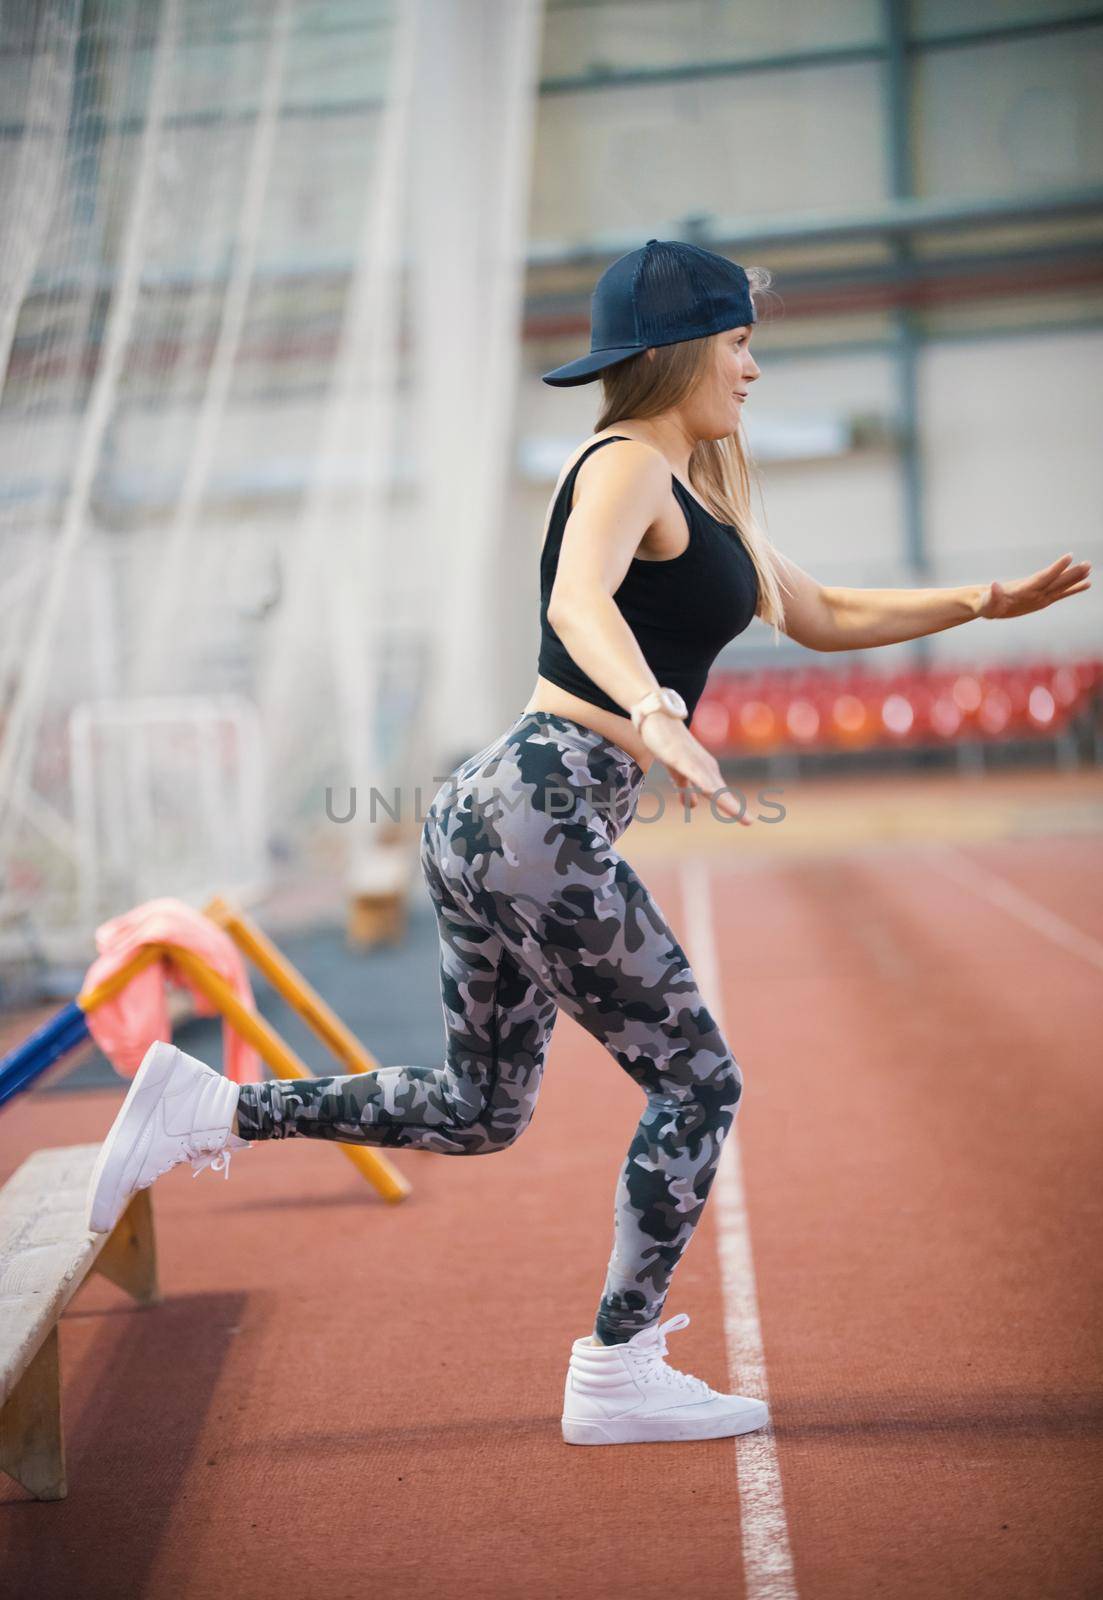 Young athletic woman in leggings warming up using a bench. Mid shot